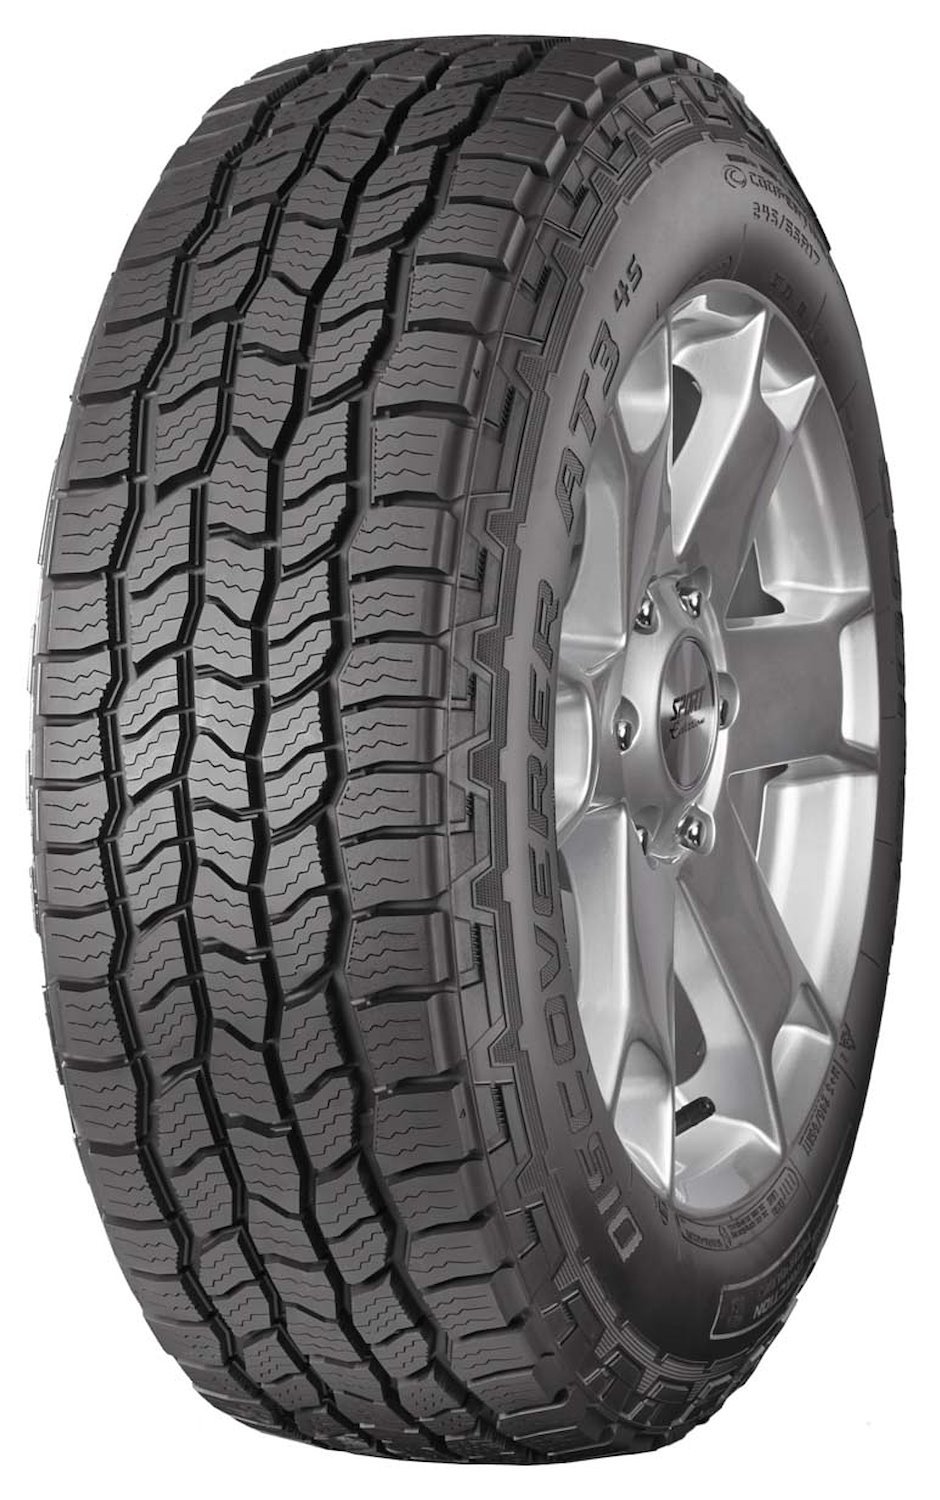 Discoverer AT3 4S All-Terrain Tire, 275/45R22